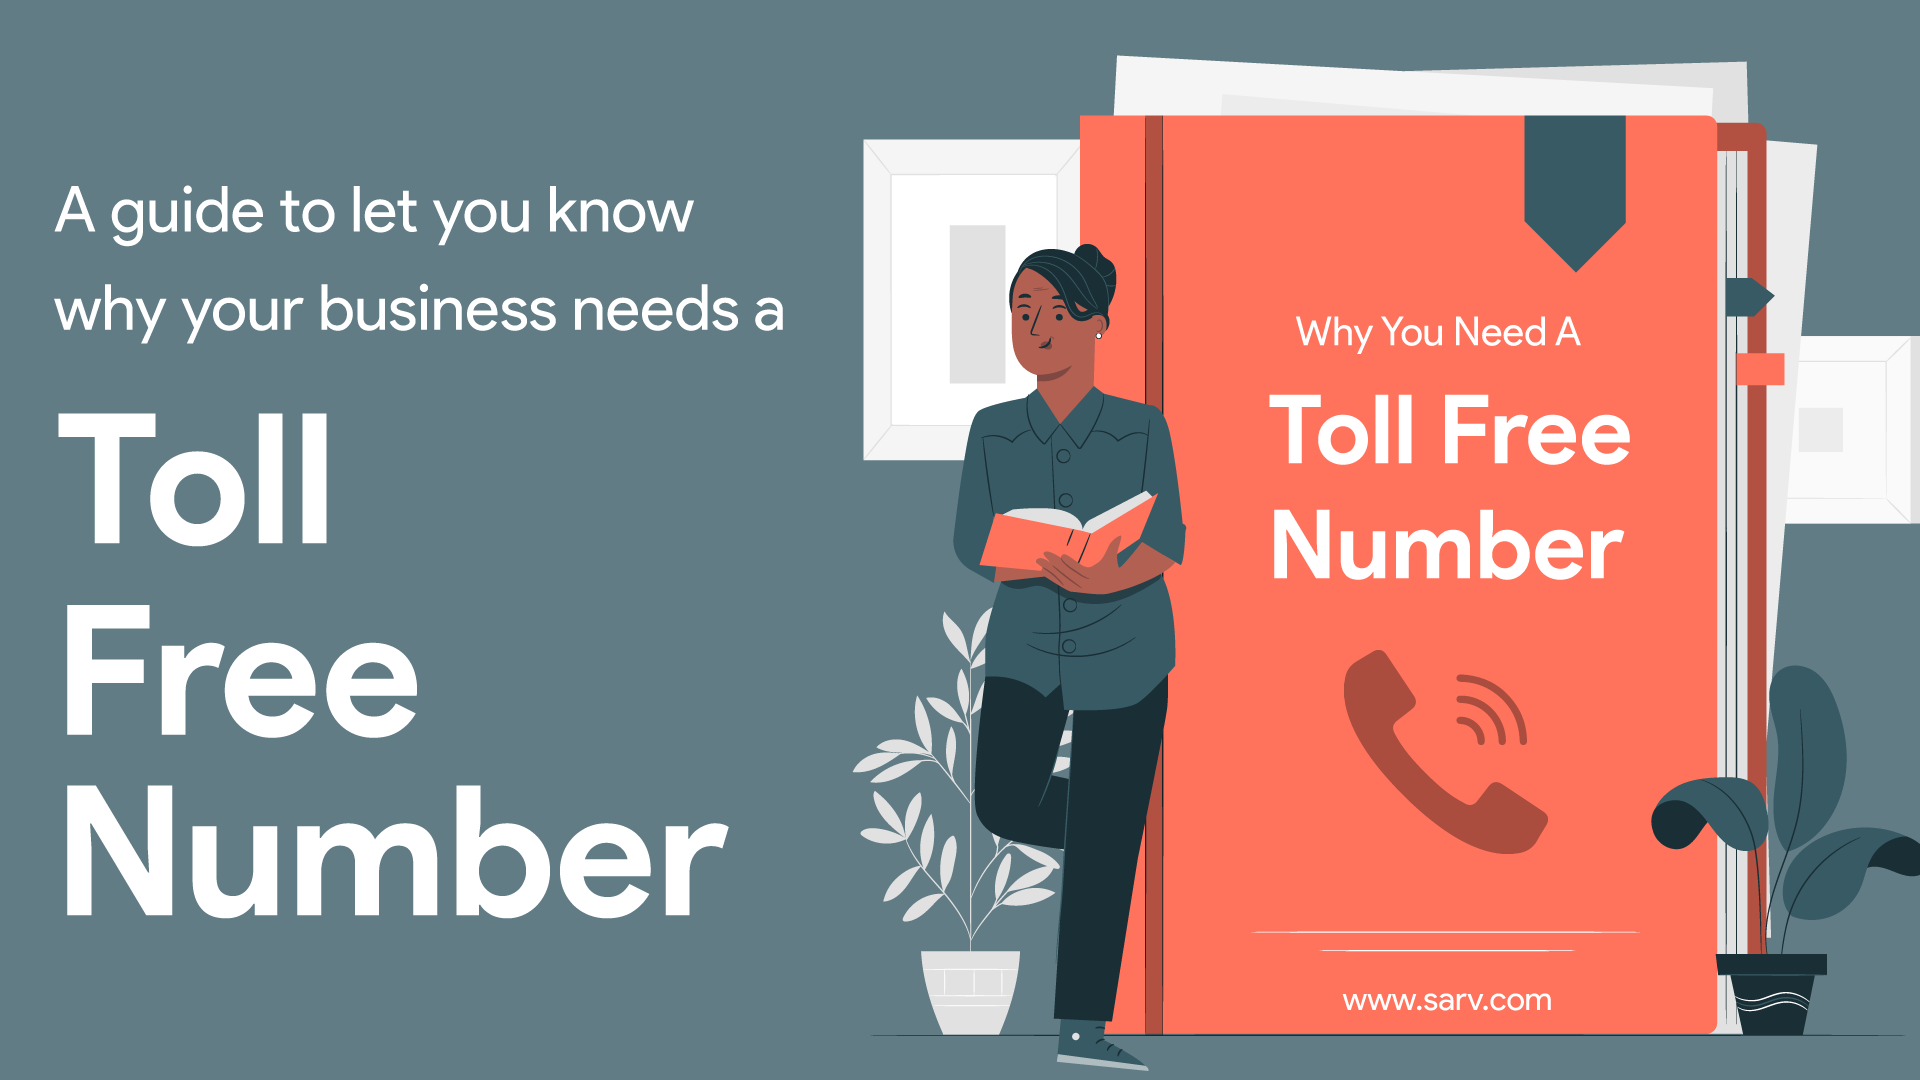 a-guide-that-will-let-you-know-why-your-business-needs-a-toll-free